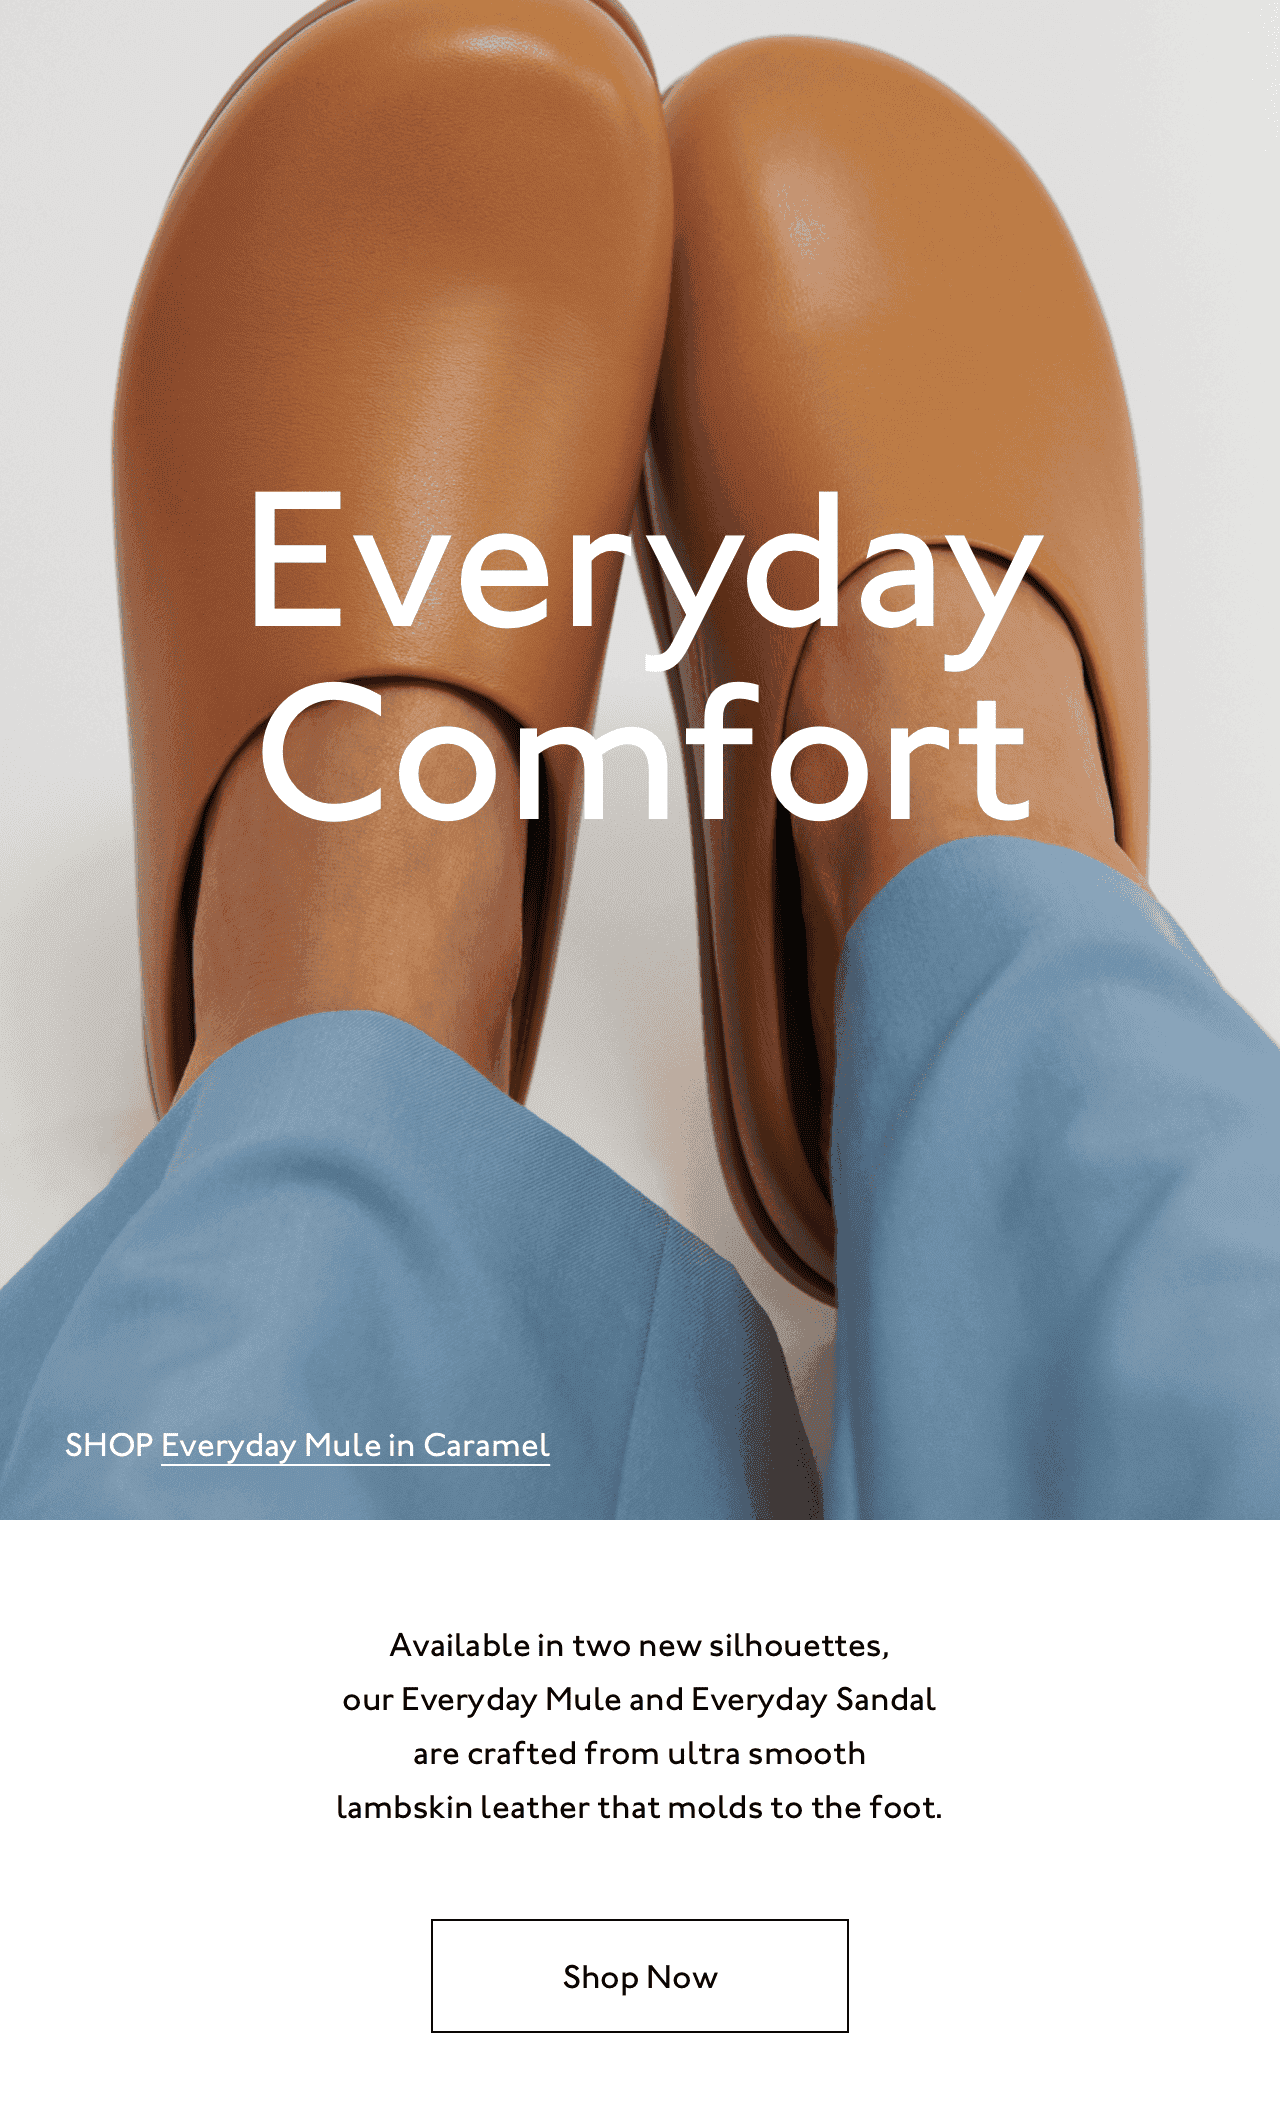 Everyday comfort. Shop two new silhouettes, our Everyday Mule and Everyday Sandal, crafted from ultra smooth lambskin leather that molds to the foot.